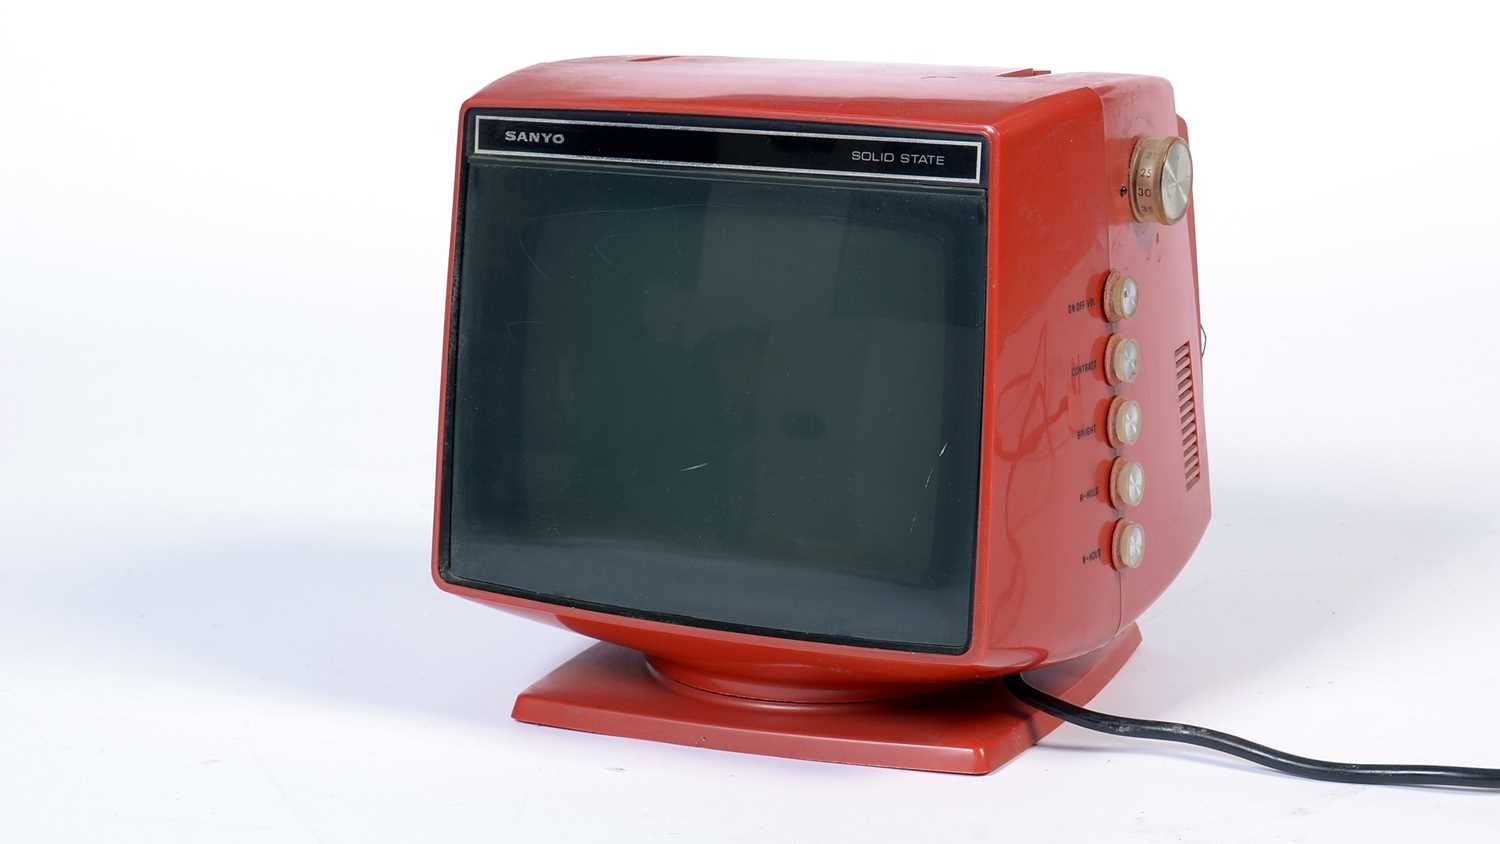 A 1970's Sanyo 'Solid State' television.